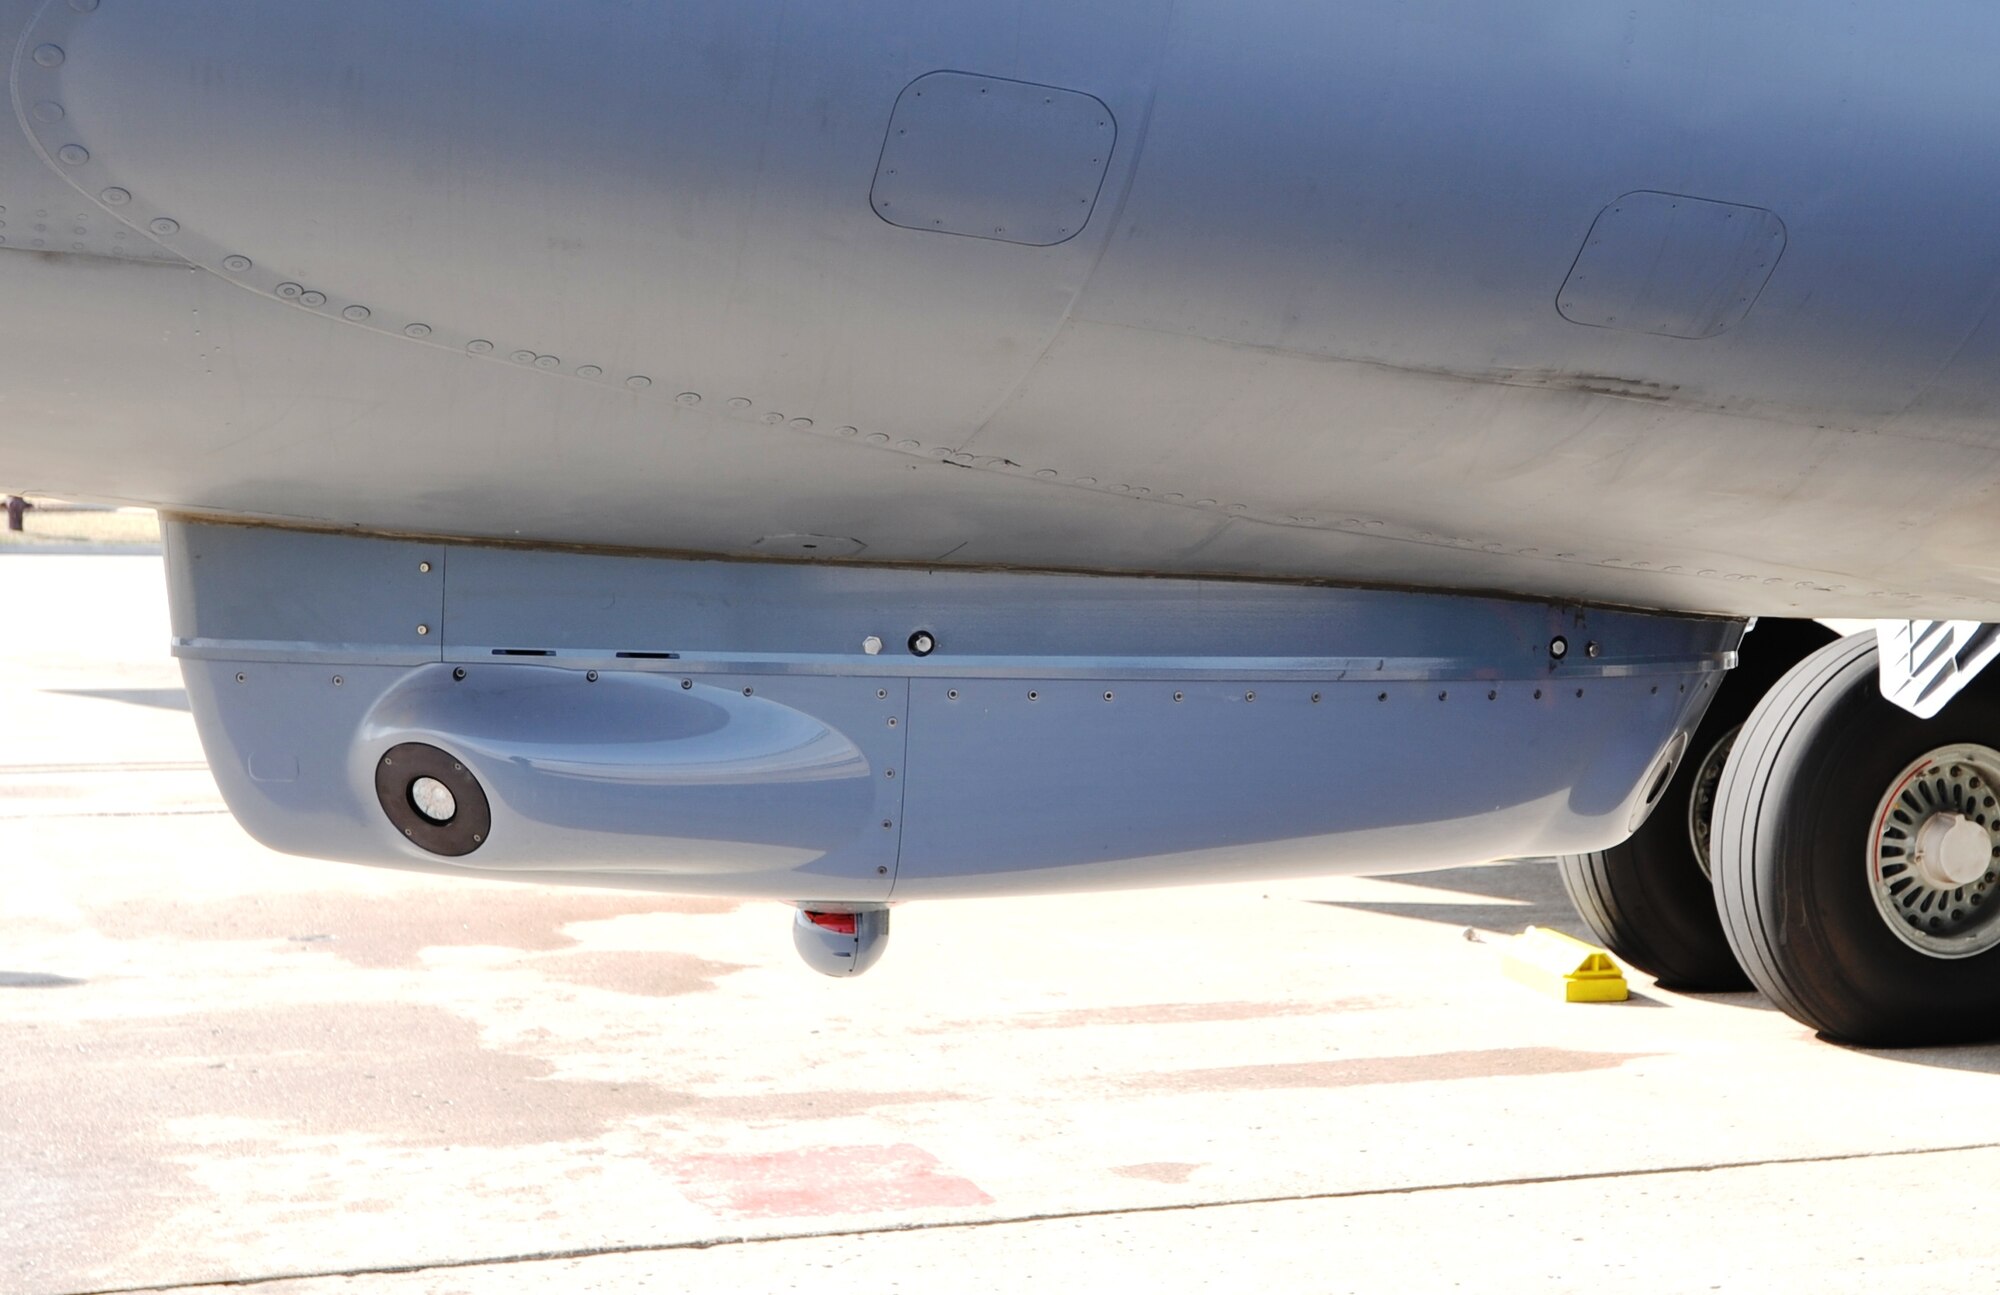 A Large Aircraft Infrared Countermeasures, or LAIRCM, system pod is attached to a KC-135 Stratotanker parked on the flightline March 1, 2011, at Scott Air Force Base, Ill.  In a combined effort between Air Mobility Command, the Air National Guard, the KC-135 Program Office, Northrop-Grumman and other agencies, a KC-135 LAIRCM pod defensive system is becoming a reality. The pod, called the Guardian System by maker Northrop-Grumman, is a laser-based countermeasures system designed to detect, provide warning of, and employ countermeasures against infrared-guided surface-to-air missiles. (U.S. Air Force Photo/Master Sgt. Scott T. Sturkol)